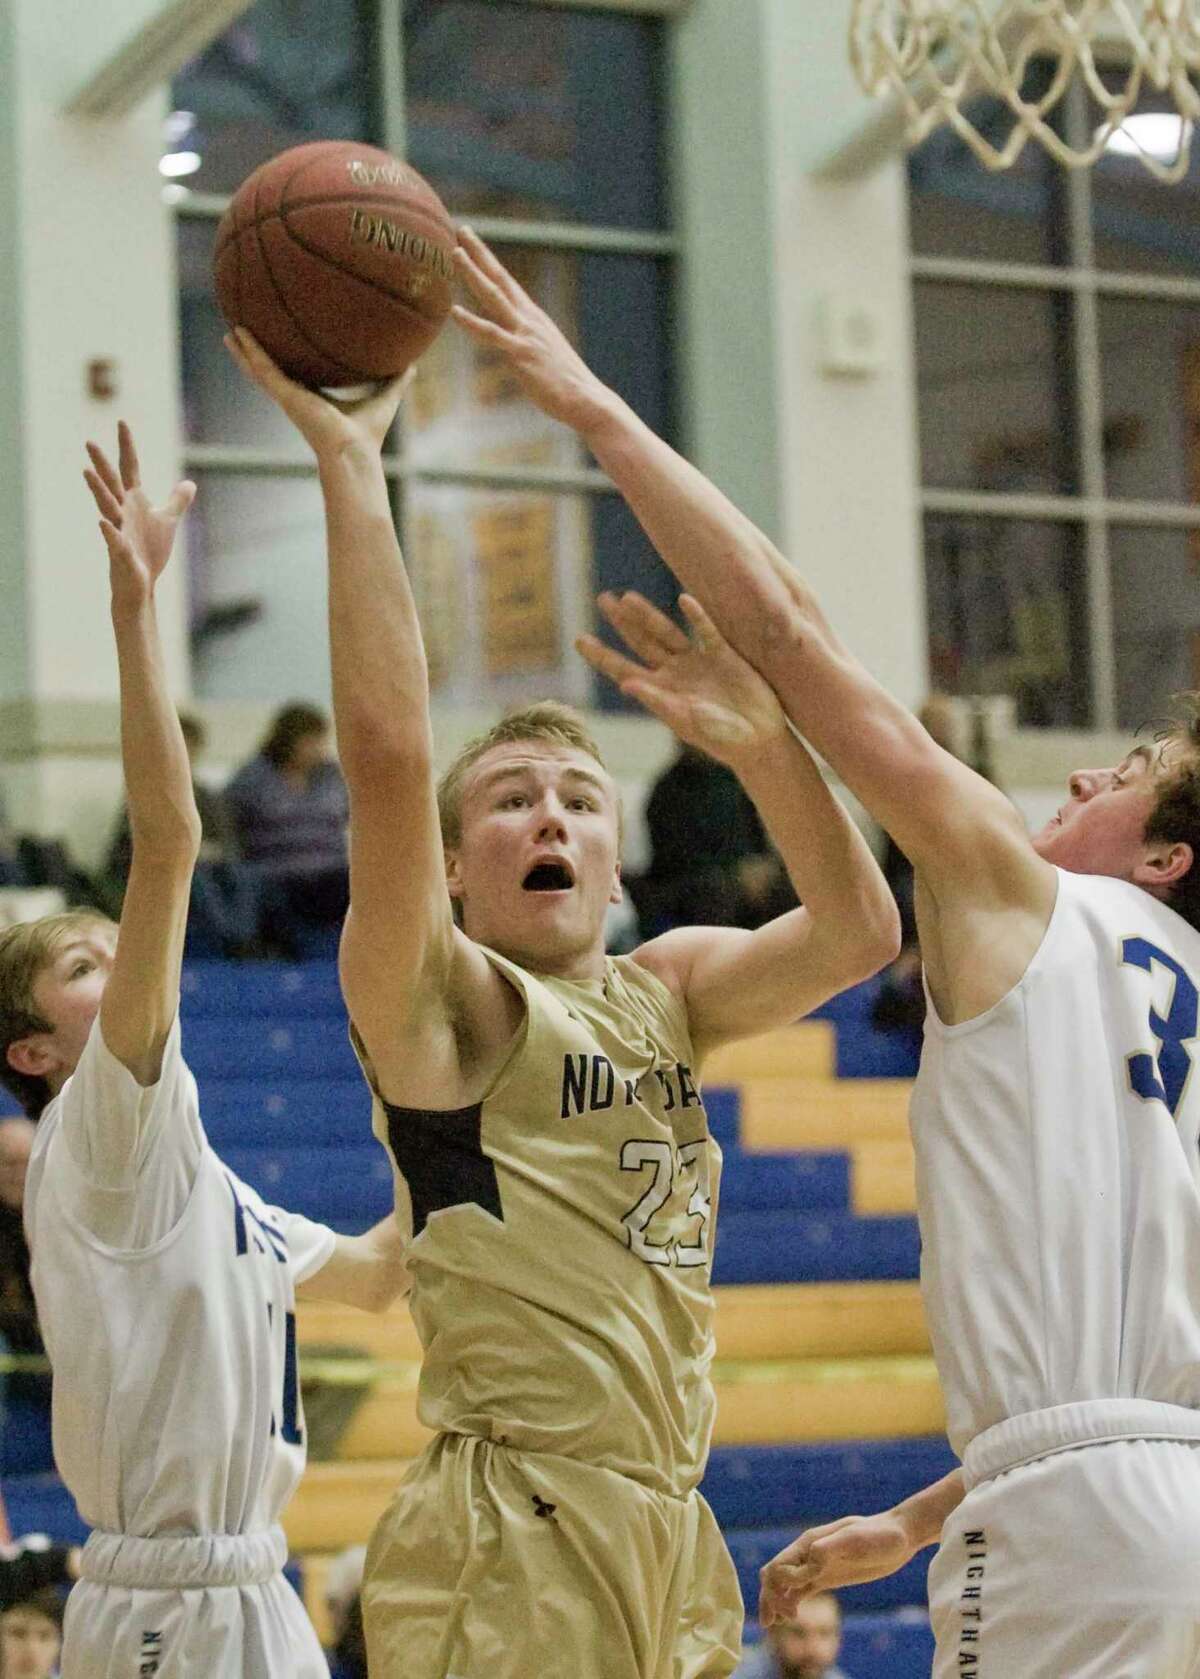 Notre Dame-Fairfield High School's Max Mitchell tries to get a shot off in a game against Newtown High School, played at Newtown. Friday, Jan. 18, 2019